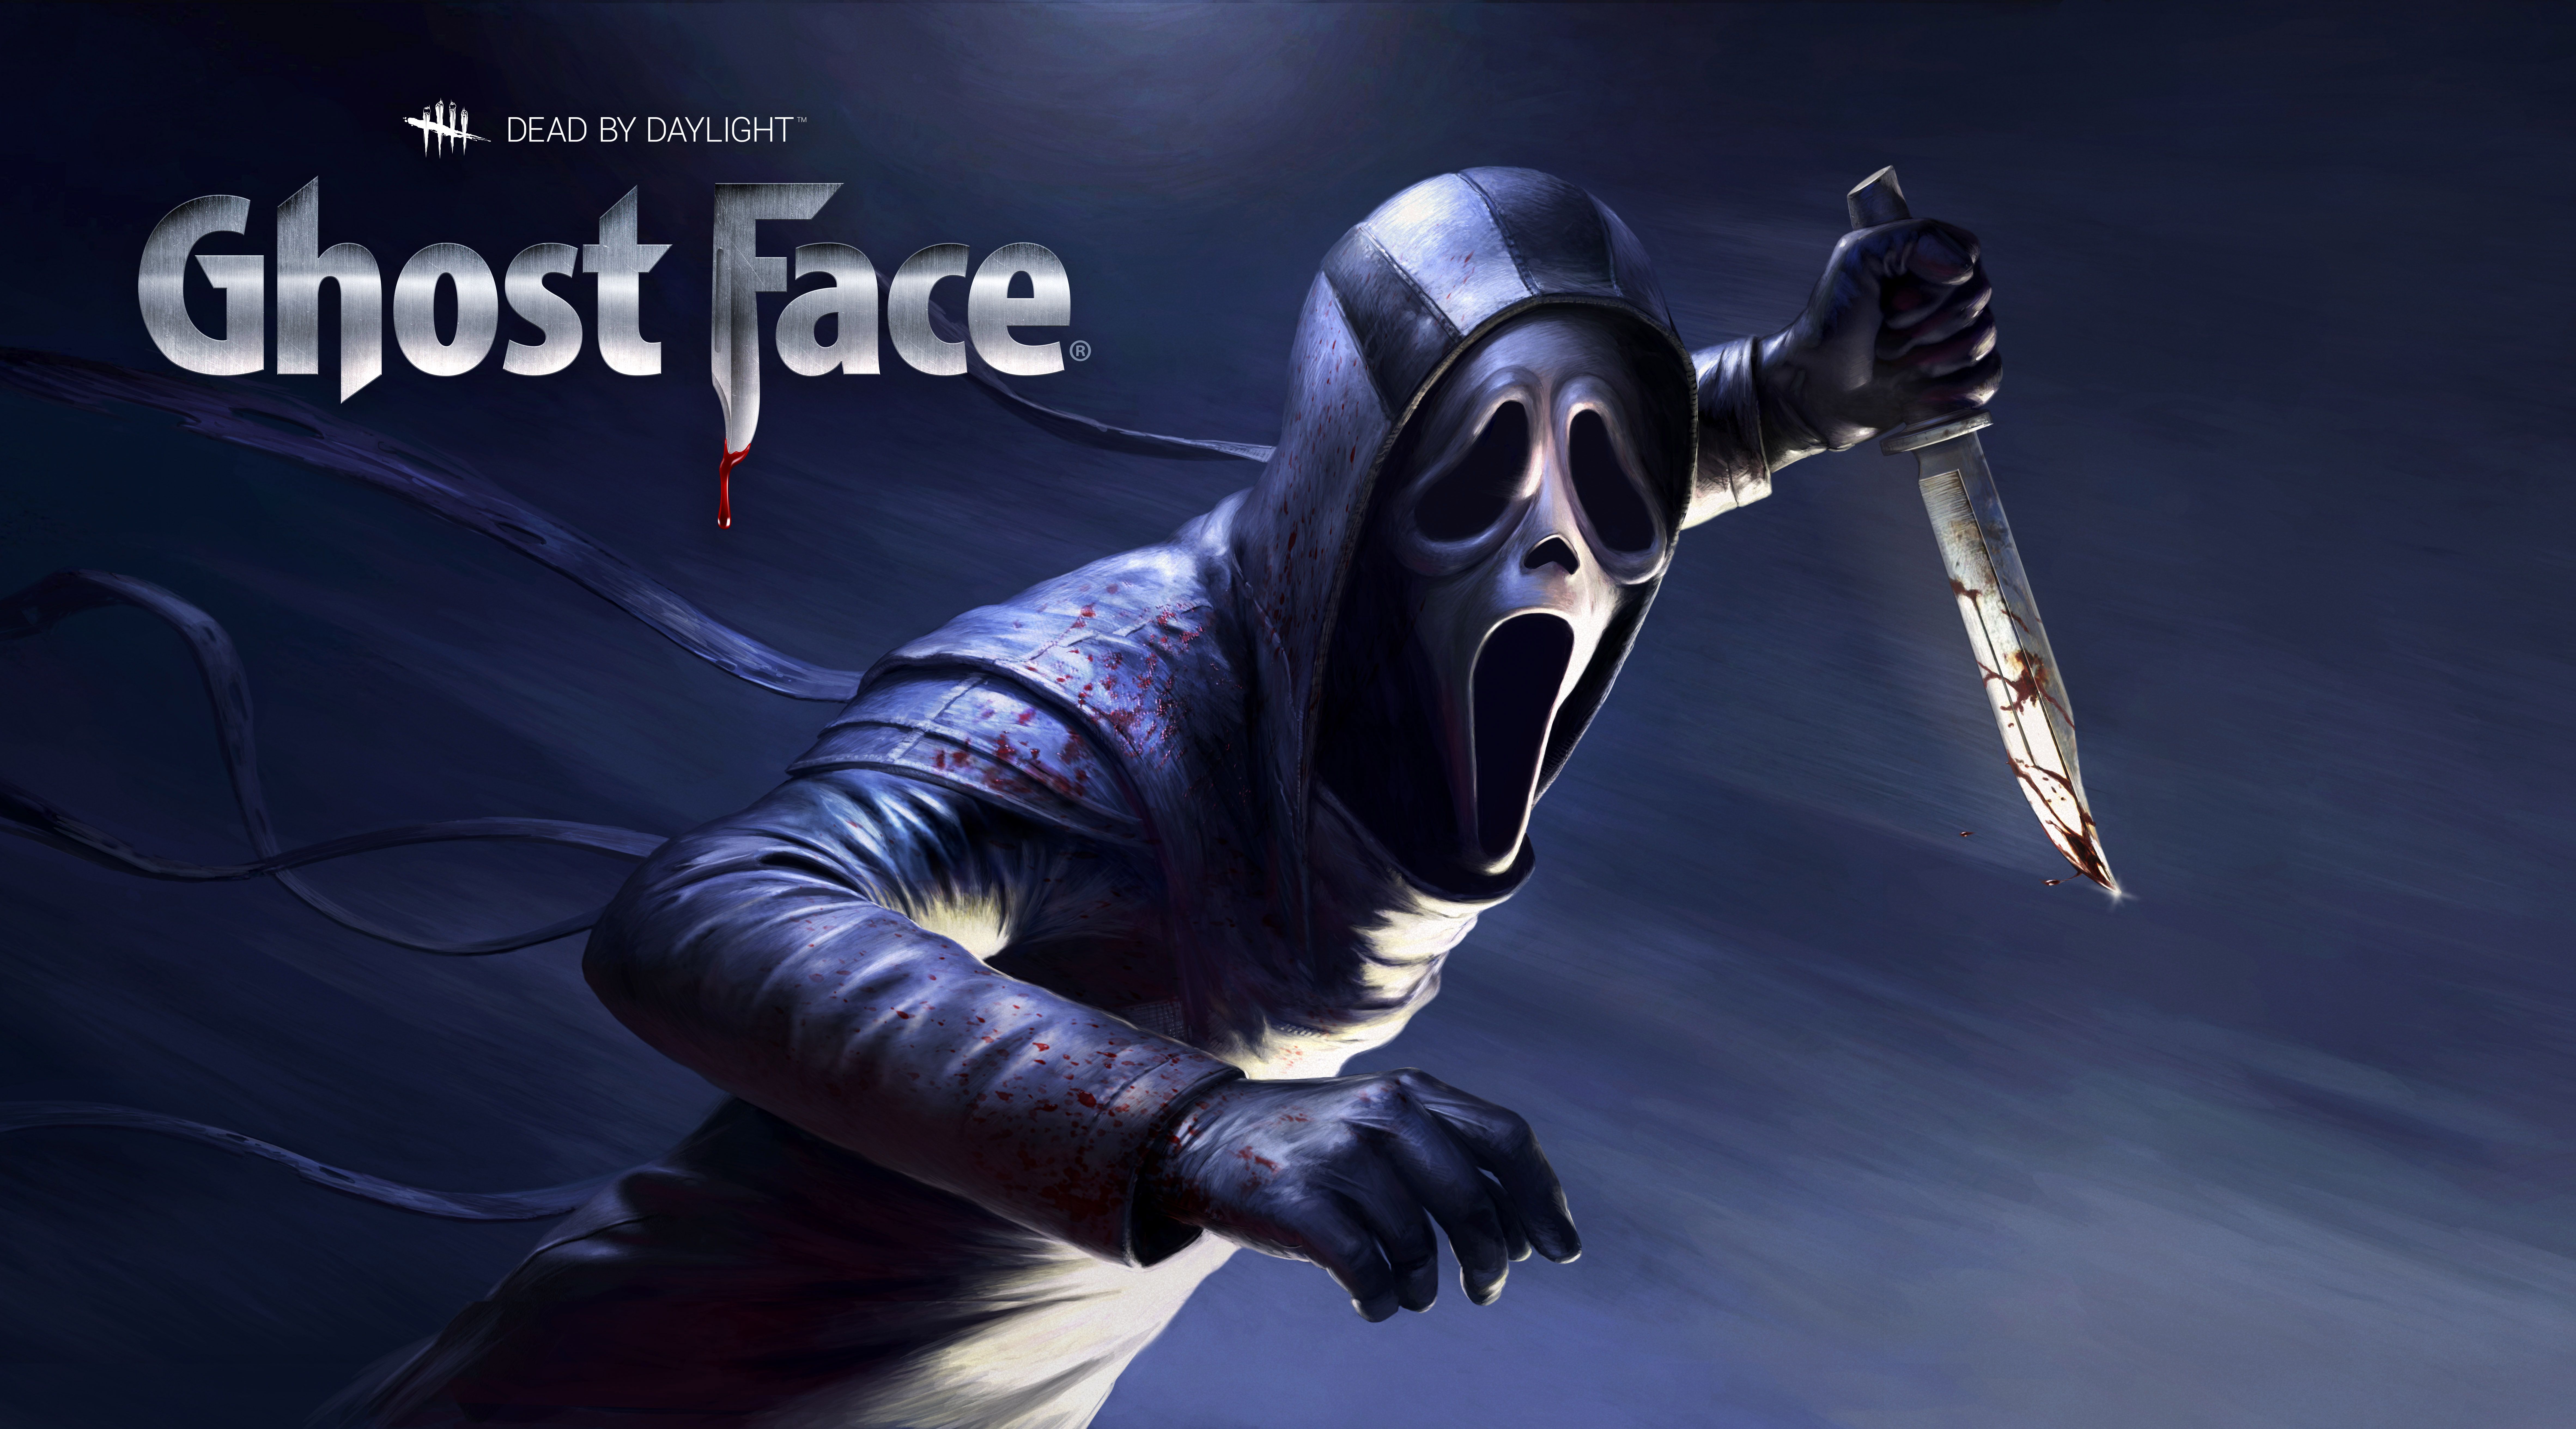 Dead By Daylight Ghostface DLC, HD Games, 4k Wallpaper, Image, Background, Photo and Picture